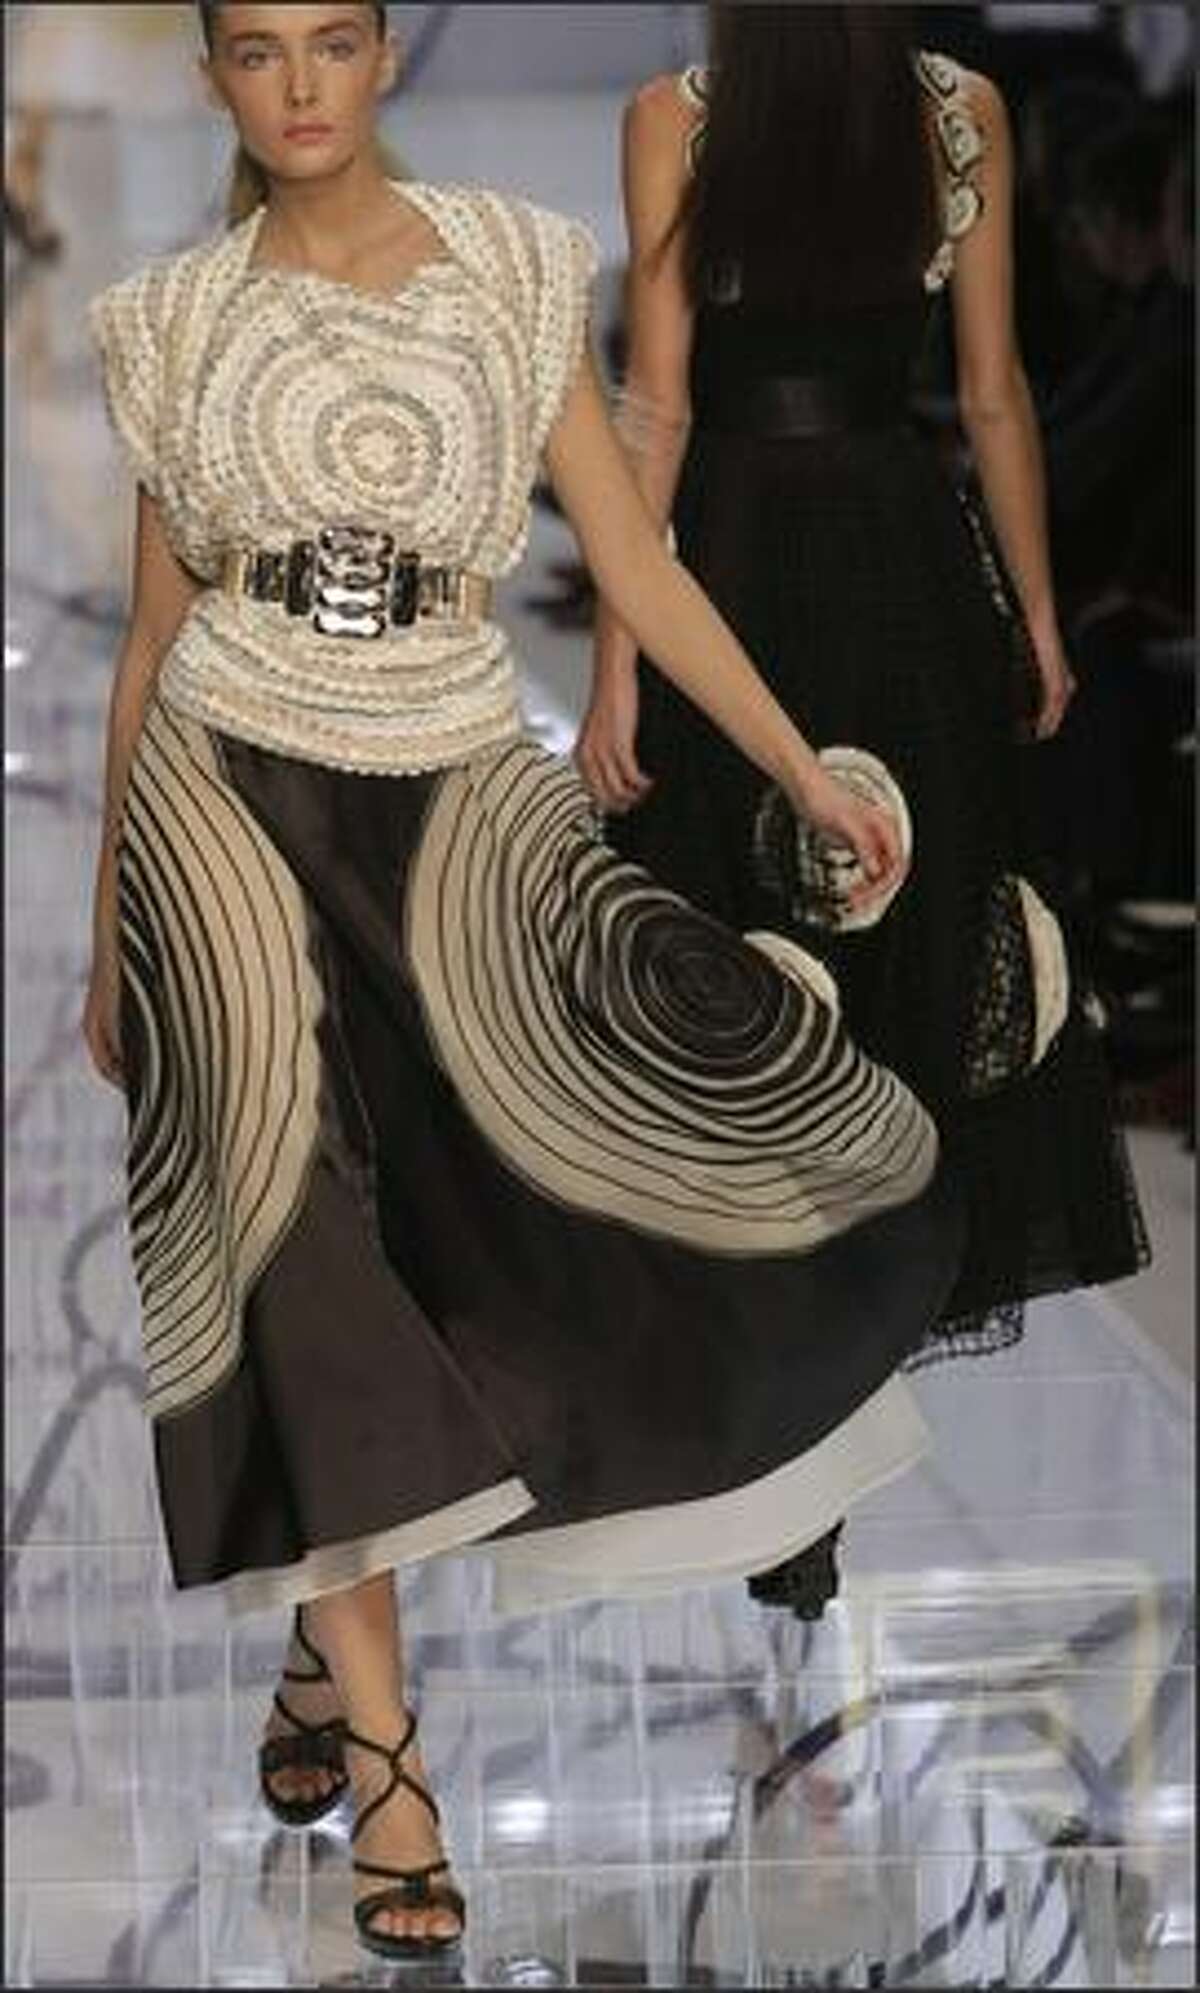 A model presents a creation by Fendi during the Spring/Summer 2008 collections of the Milan ready-to-wear fashion shows.